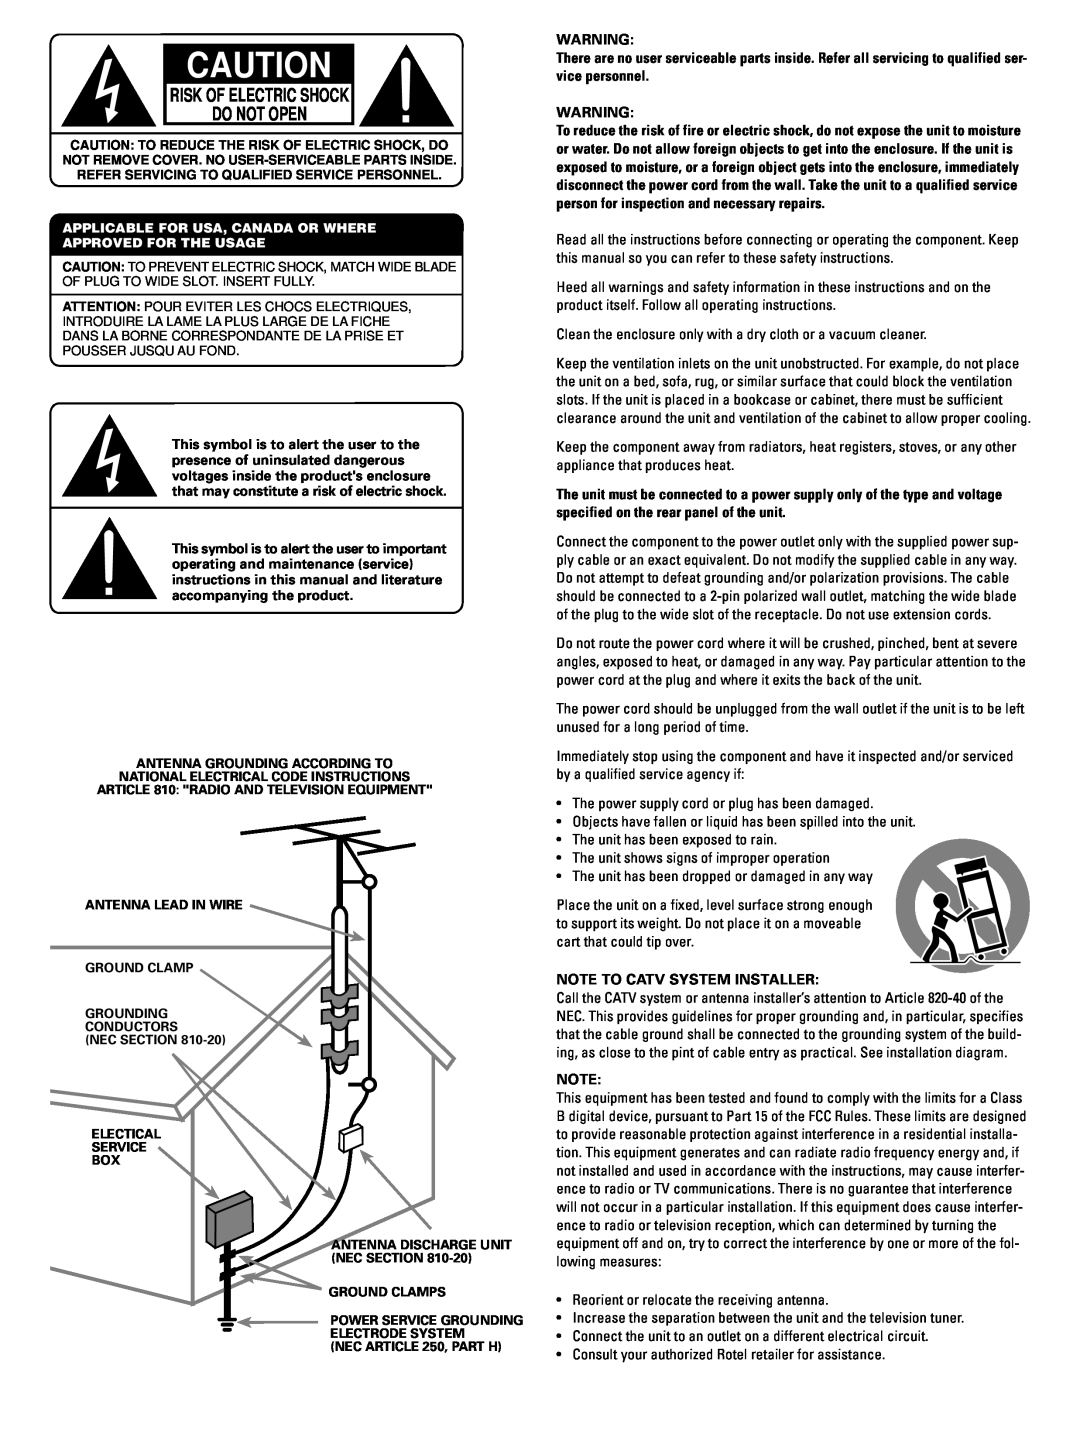 Rotel RSX-965 owner manual Risk Of Electric Shock Do Not Open 